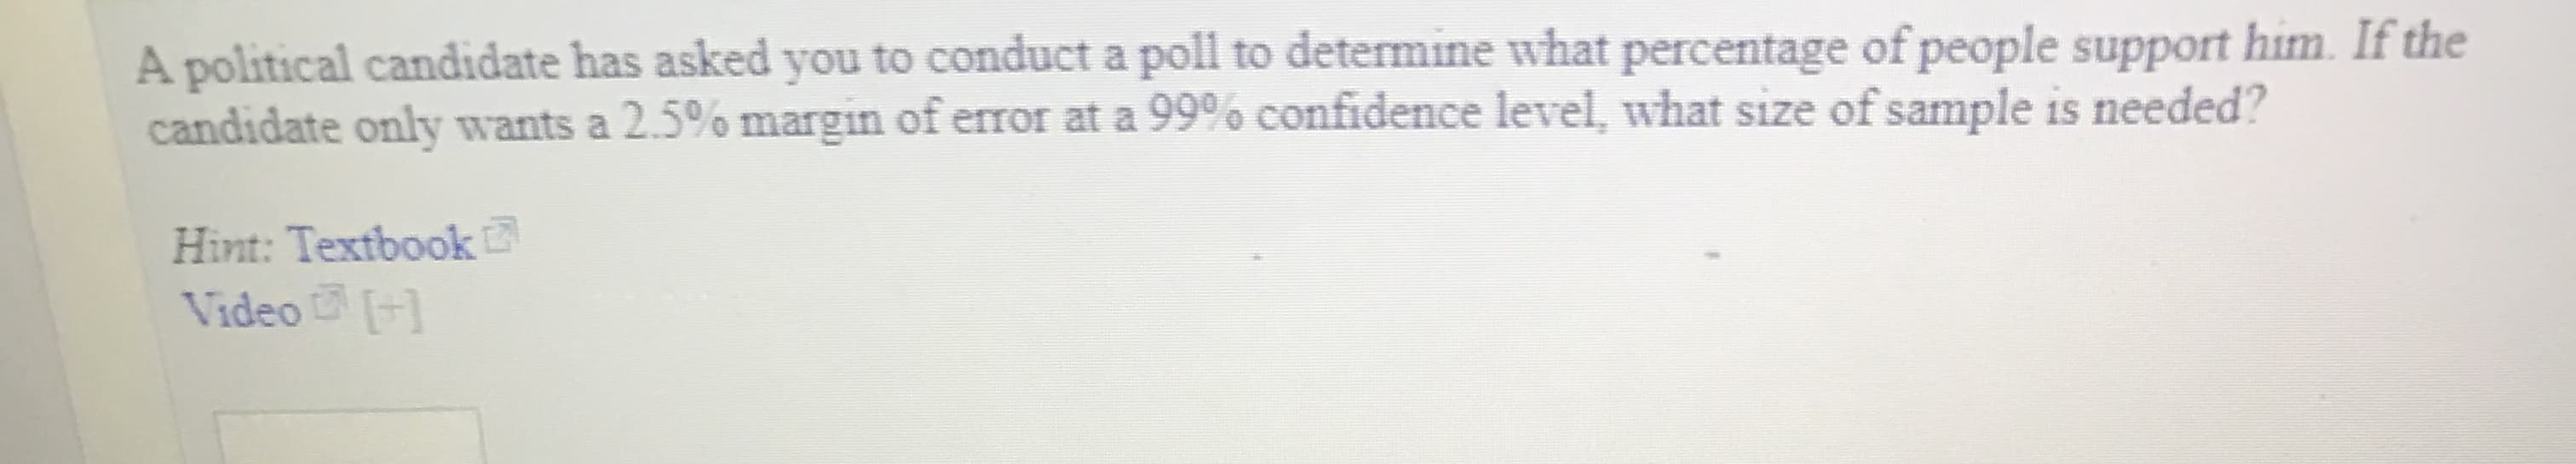 A political candidate has asked you to conduct a poll to determine what percentage of people support him. If the
candidate only wants a 25% margin of error at a 99% confidence level, what size of sample is needed?
Hint: Textbook
Video
